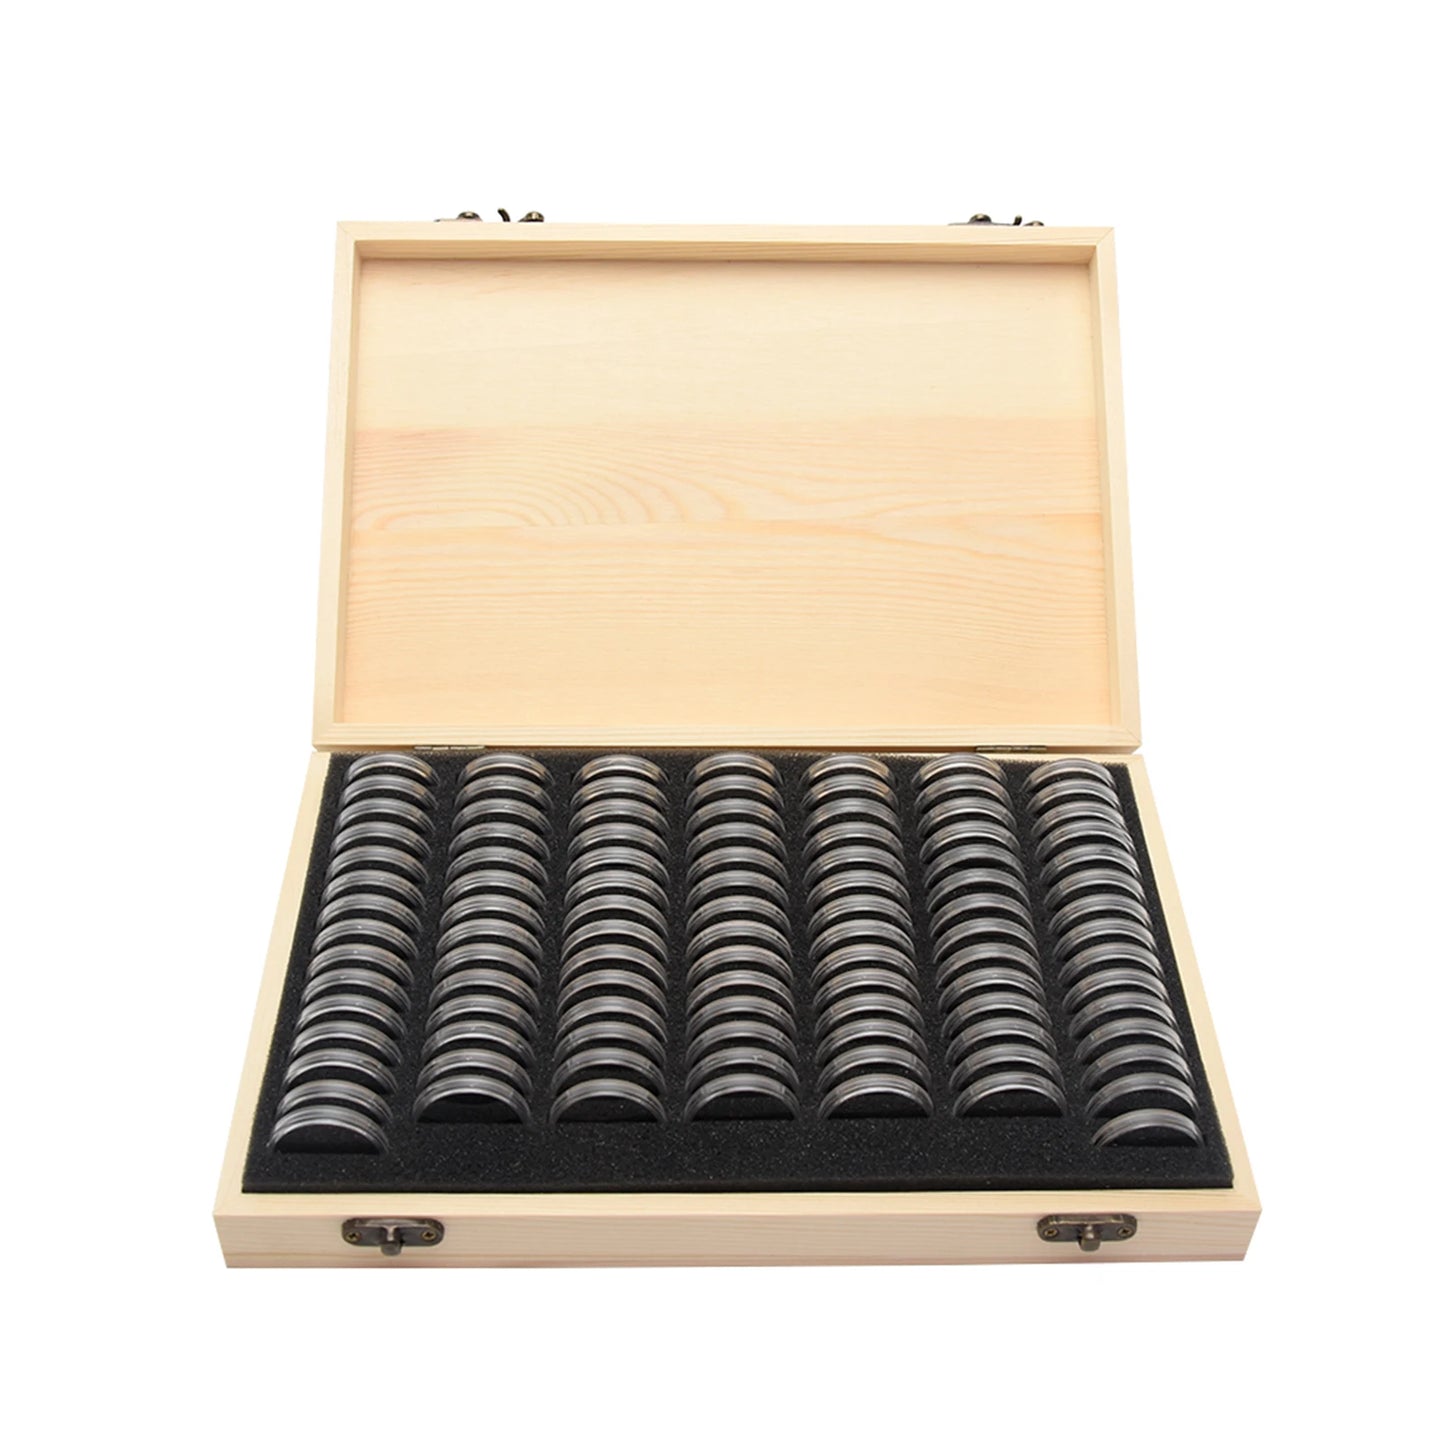 Unique Wooden Coin Display Case - Adjustable and Stylish for Collectors"